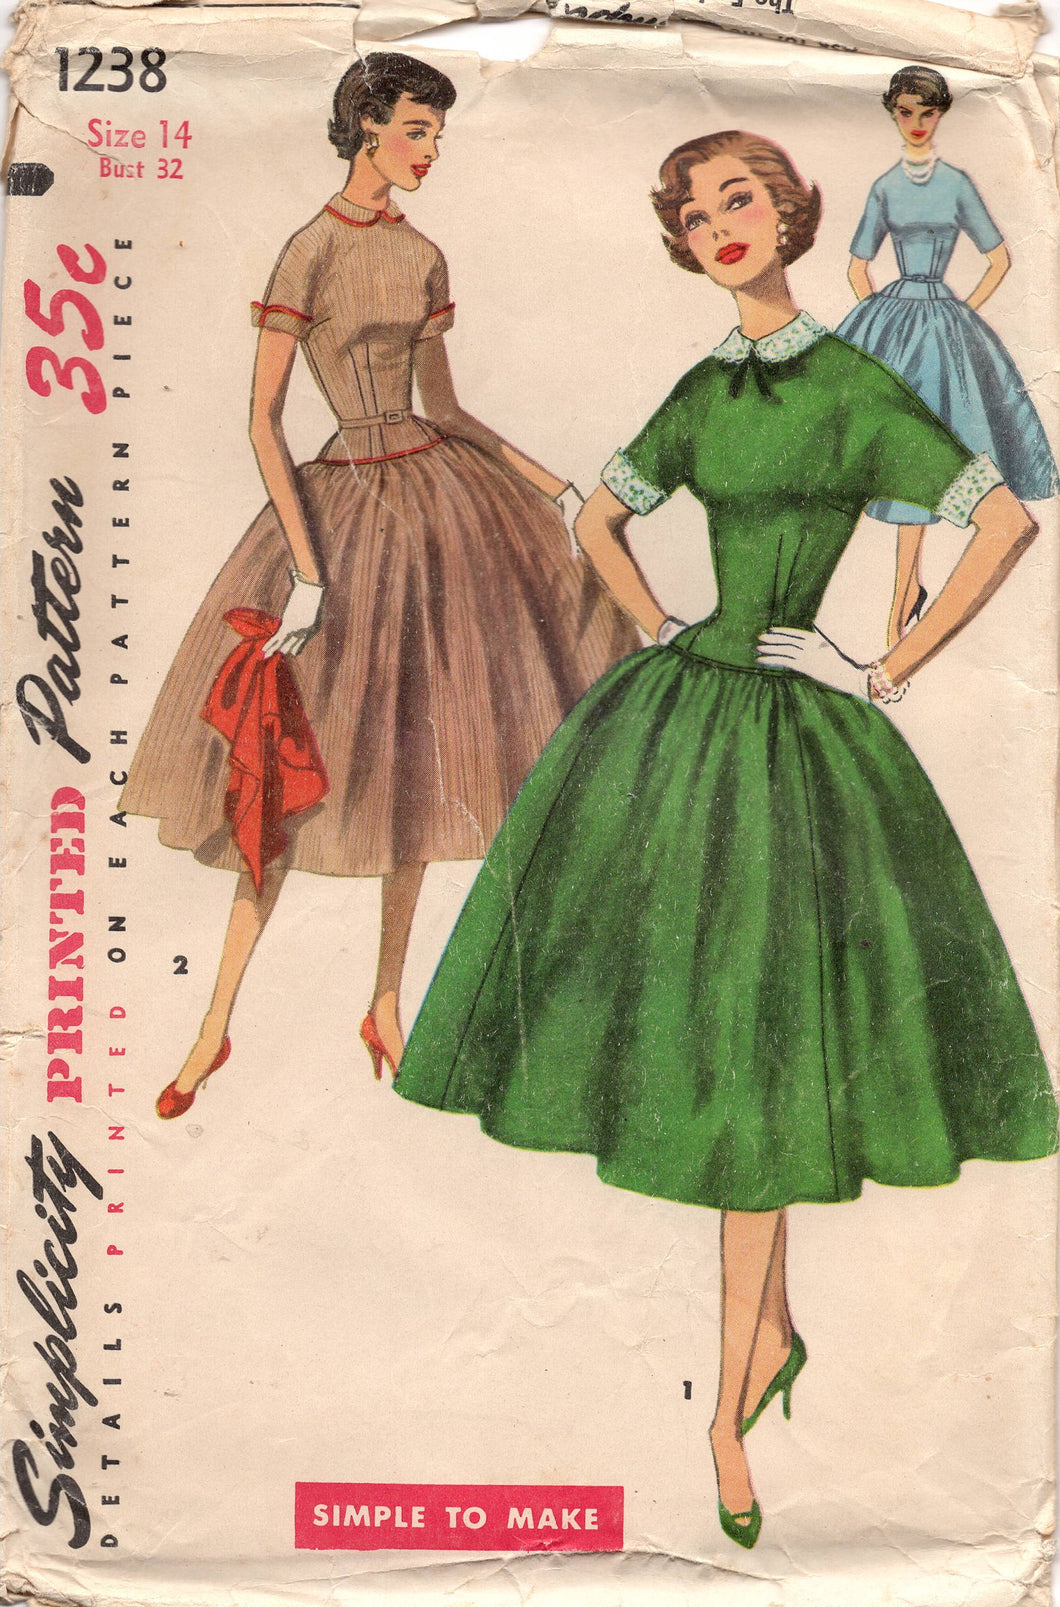 1950's Simplicity One Piece Drop Waist Fit and Flare Dress with High Neckline and Peter Pan Collar - Bust 32